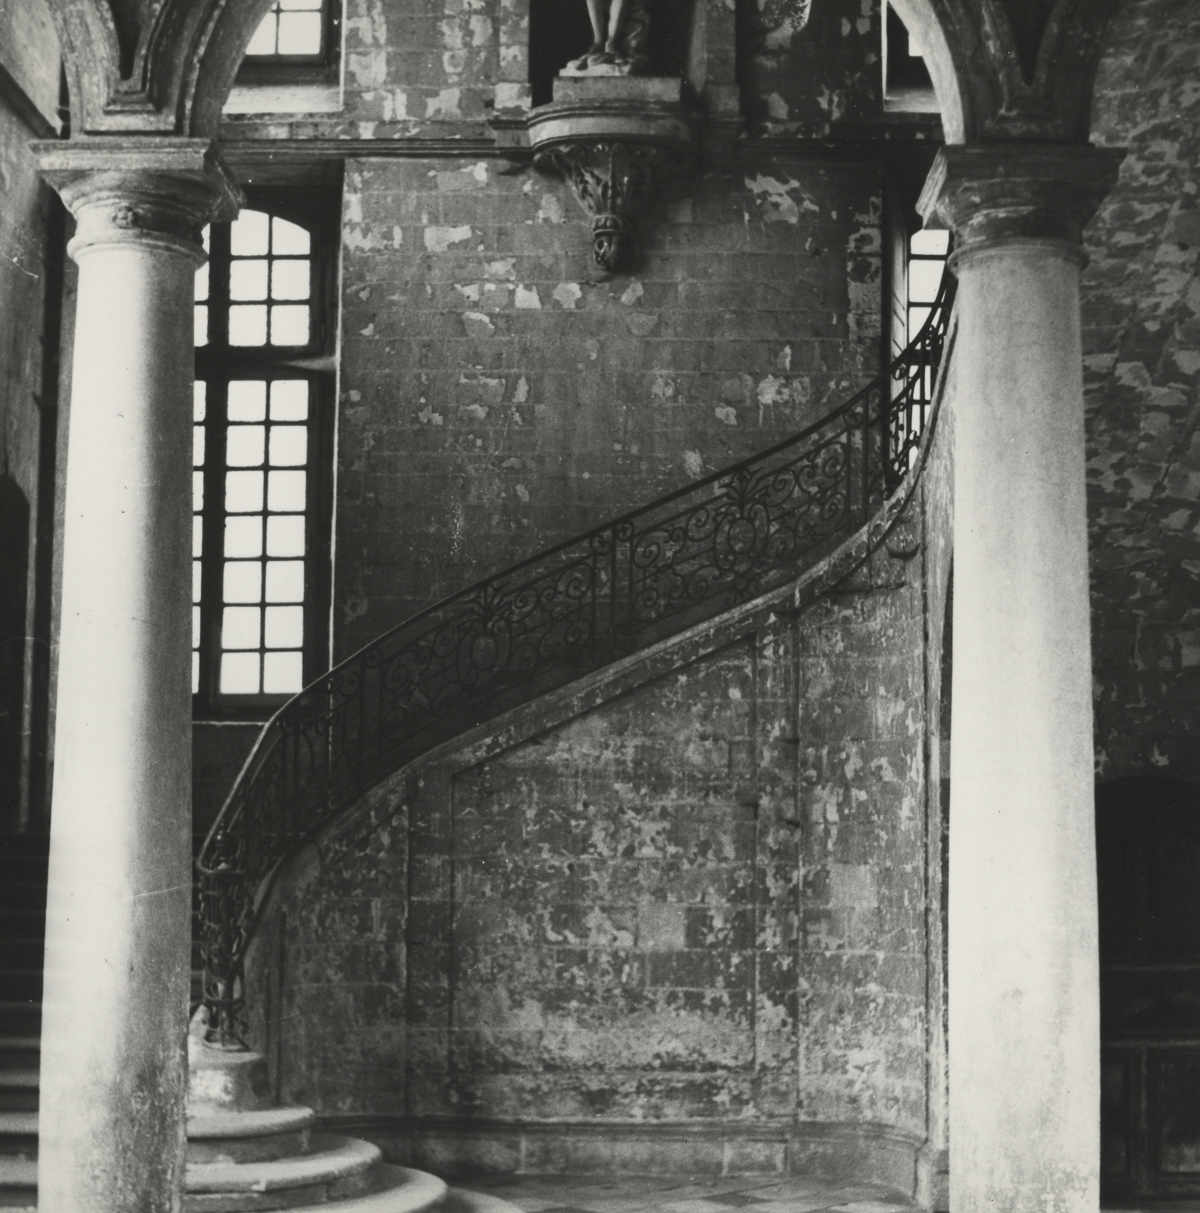 black and white photo of inside a building, the decorative iron railing of a staircase between two stone pillars